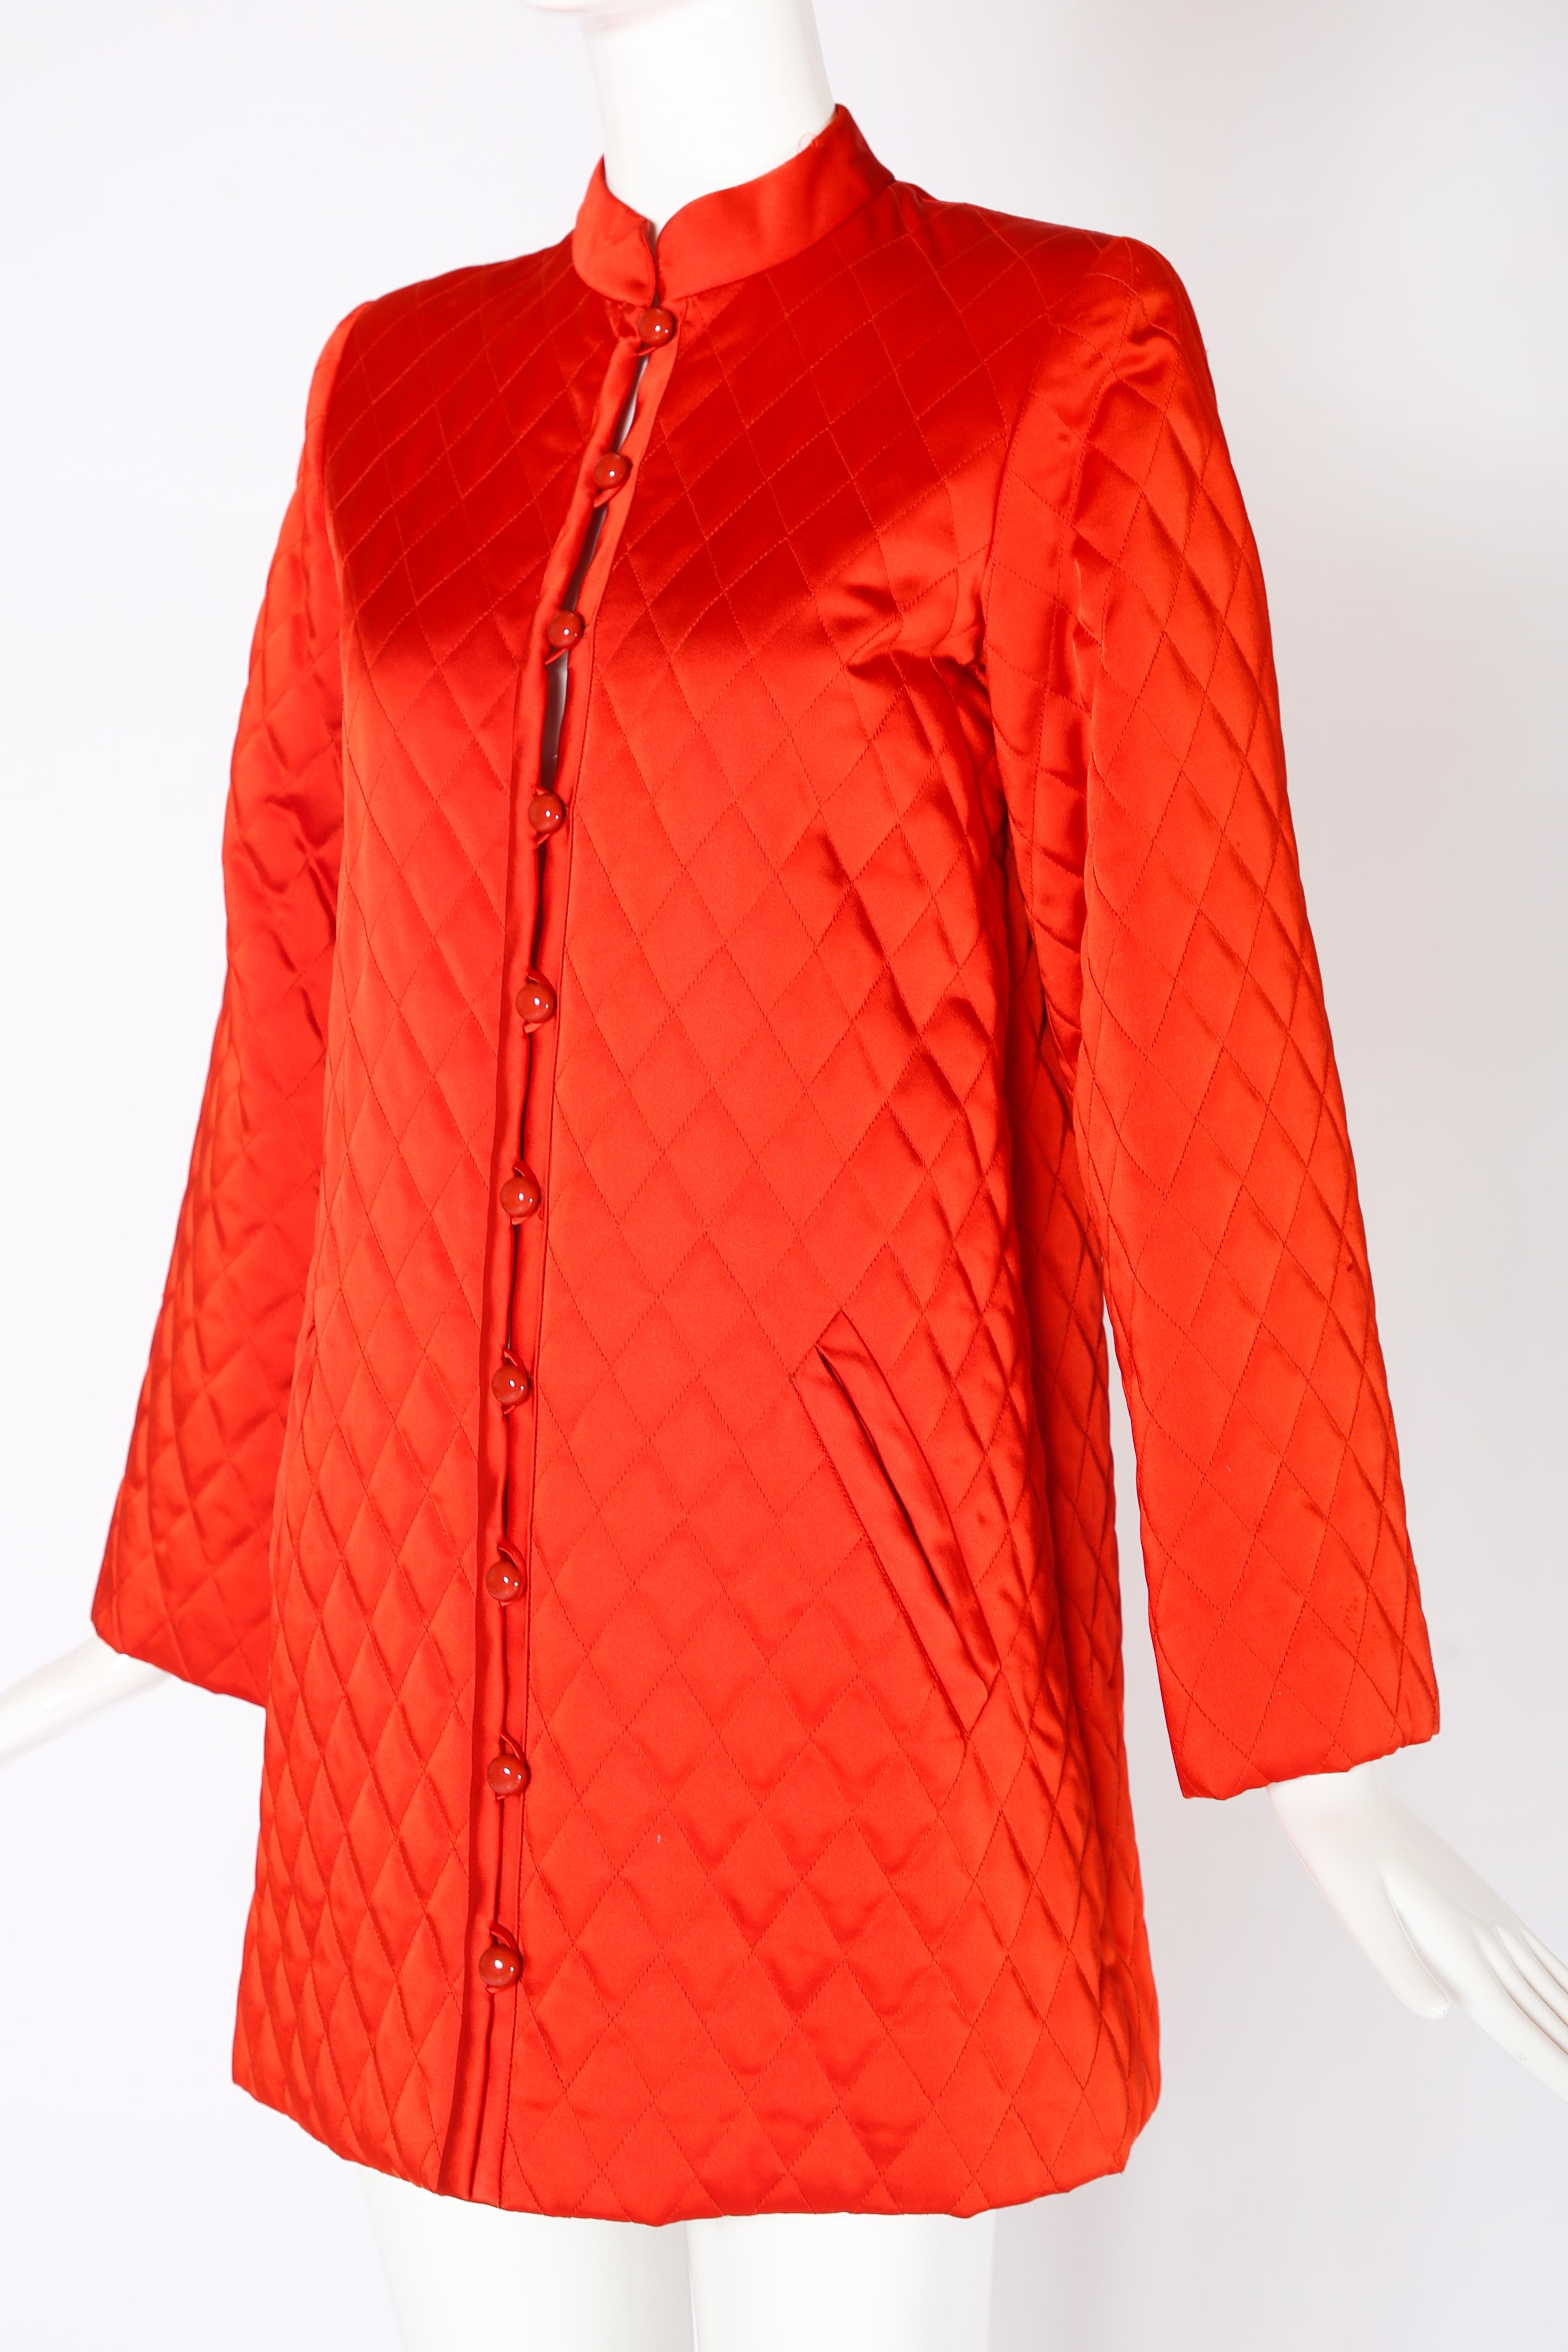 1970's Yves Saint Laurent Red/Orange Quilted Jacket In Excellent Condition For Sale In Studio City, CA